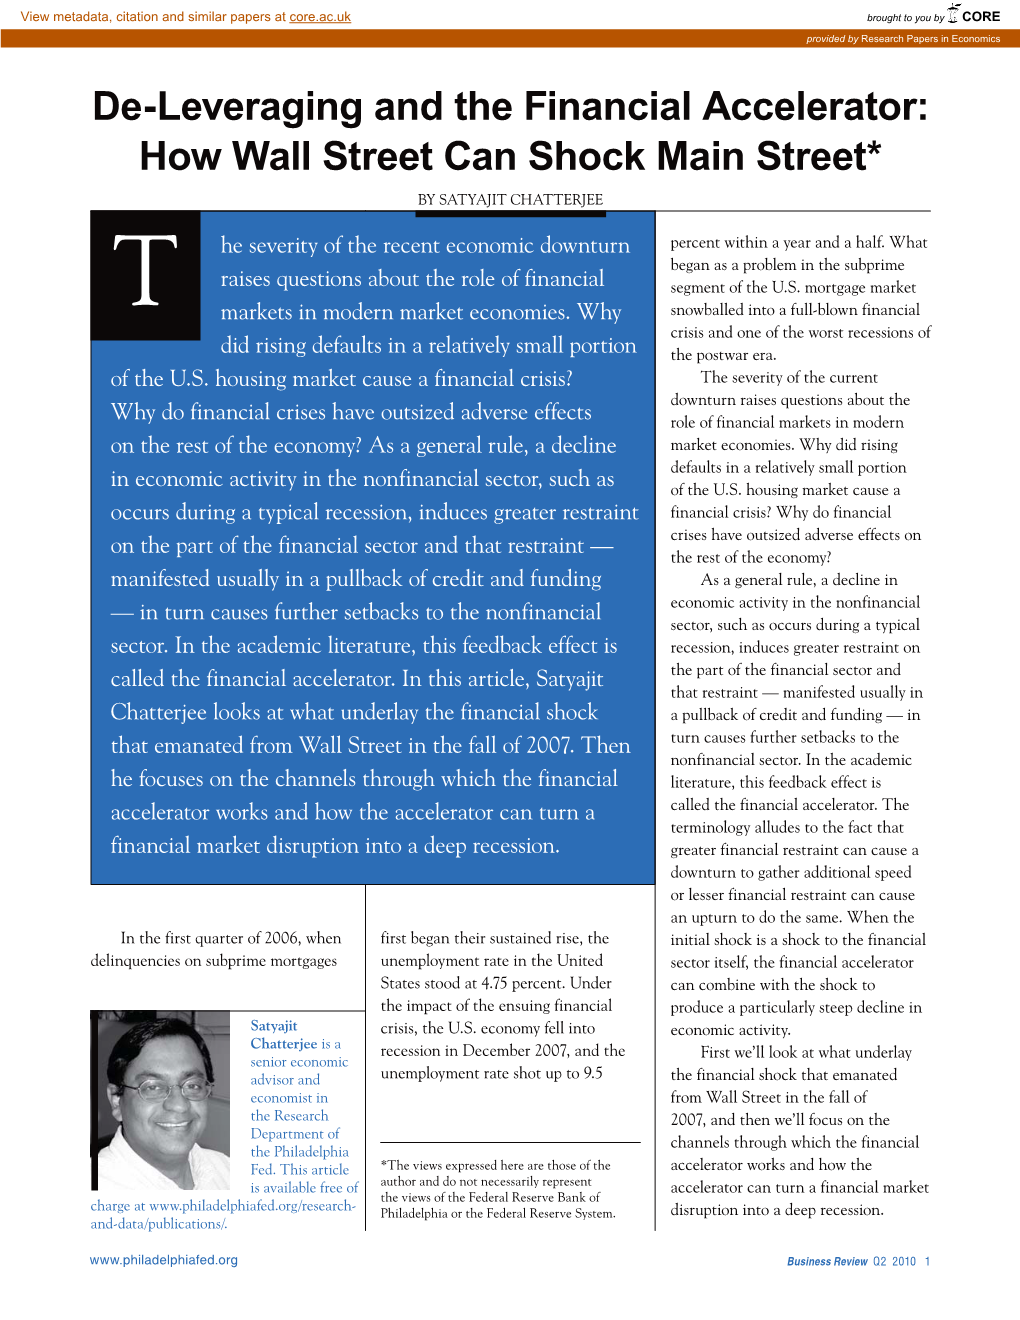 De-Leveraging and the Financial Accelerator: How Wall Street Can Shock Main Street* by SATYAJIT CHATTERJEE